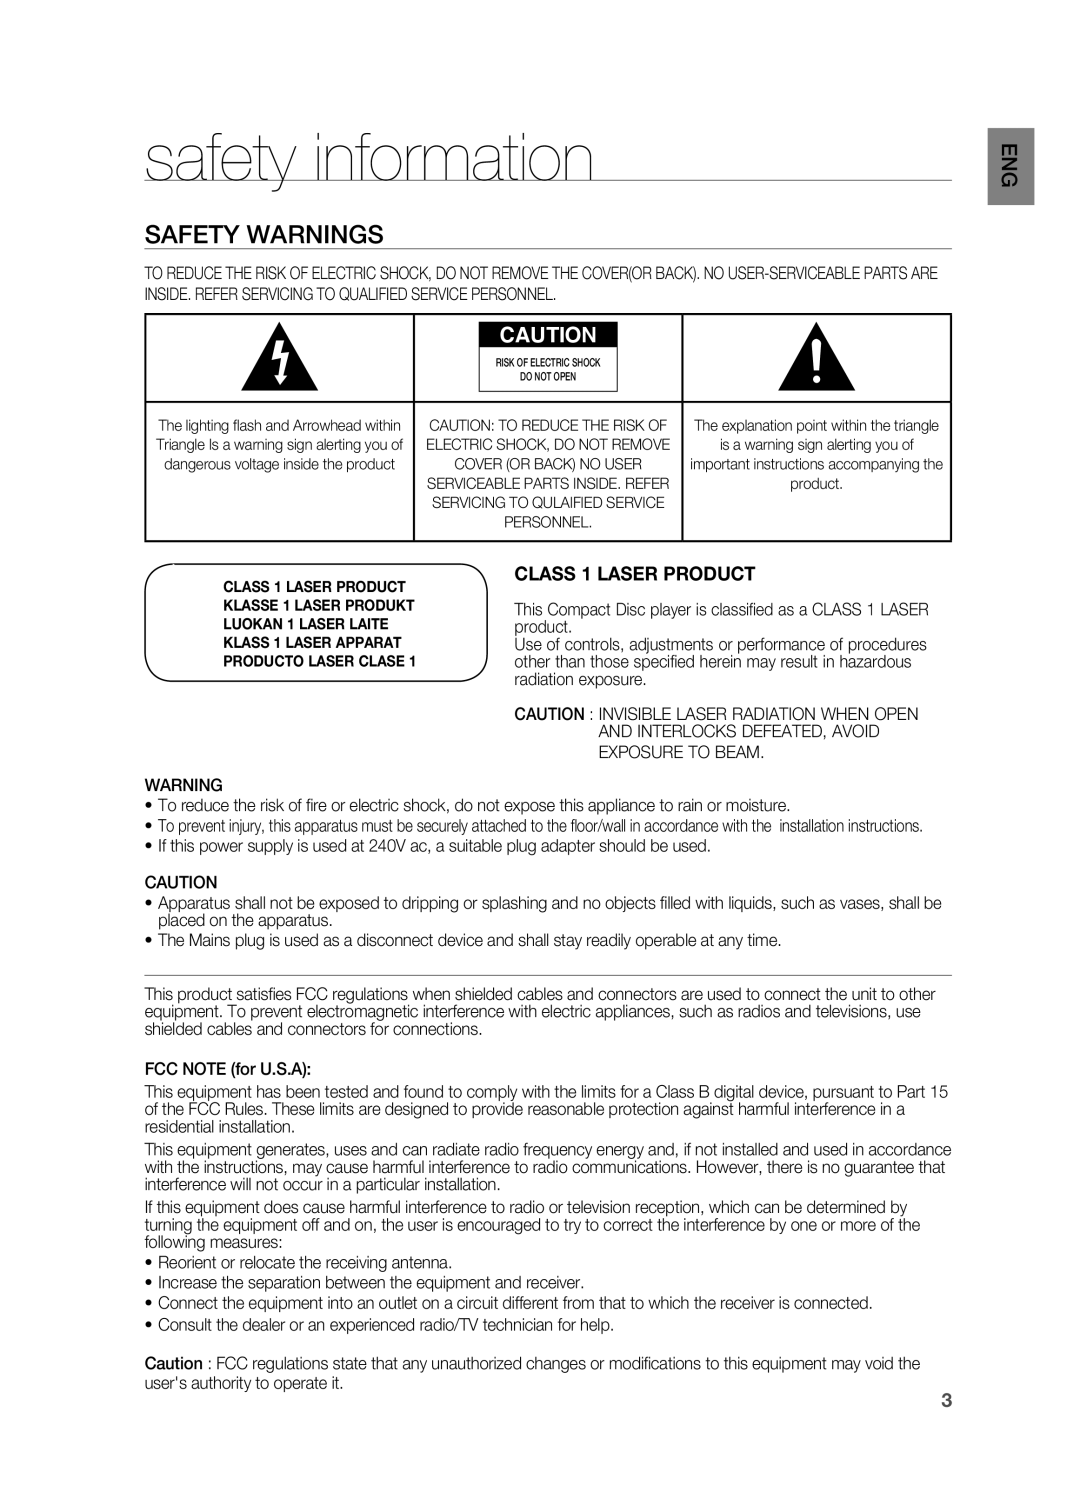 Samsung HT-X810 user manual safety information, Safety Warnings, CLASS 1 LASER PRODUCT 